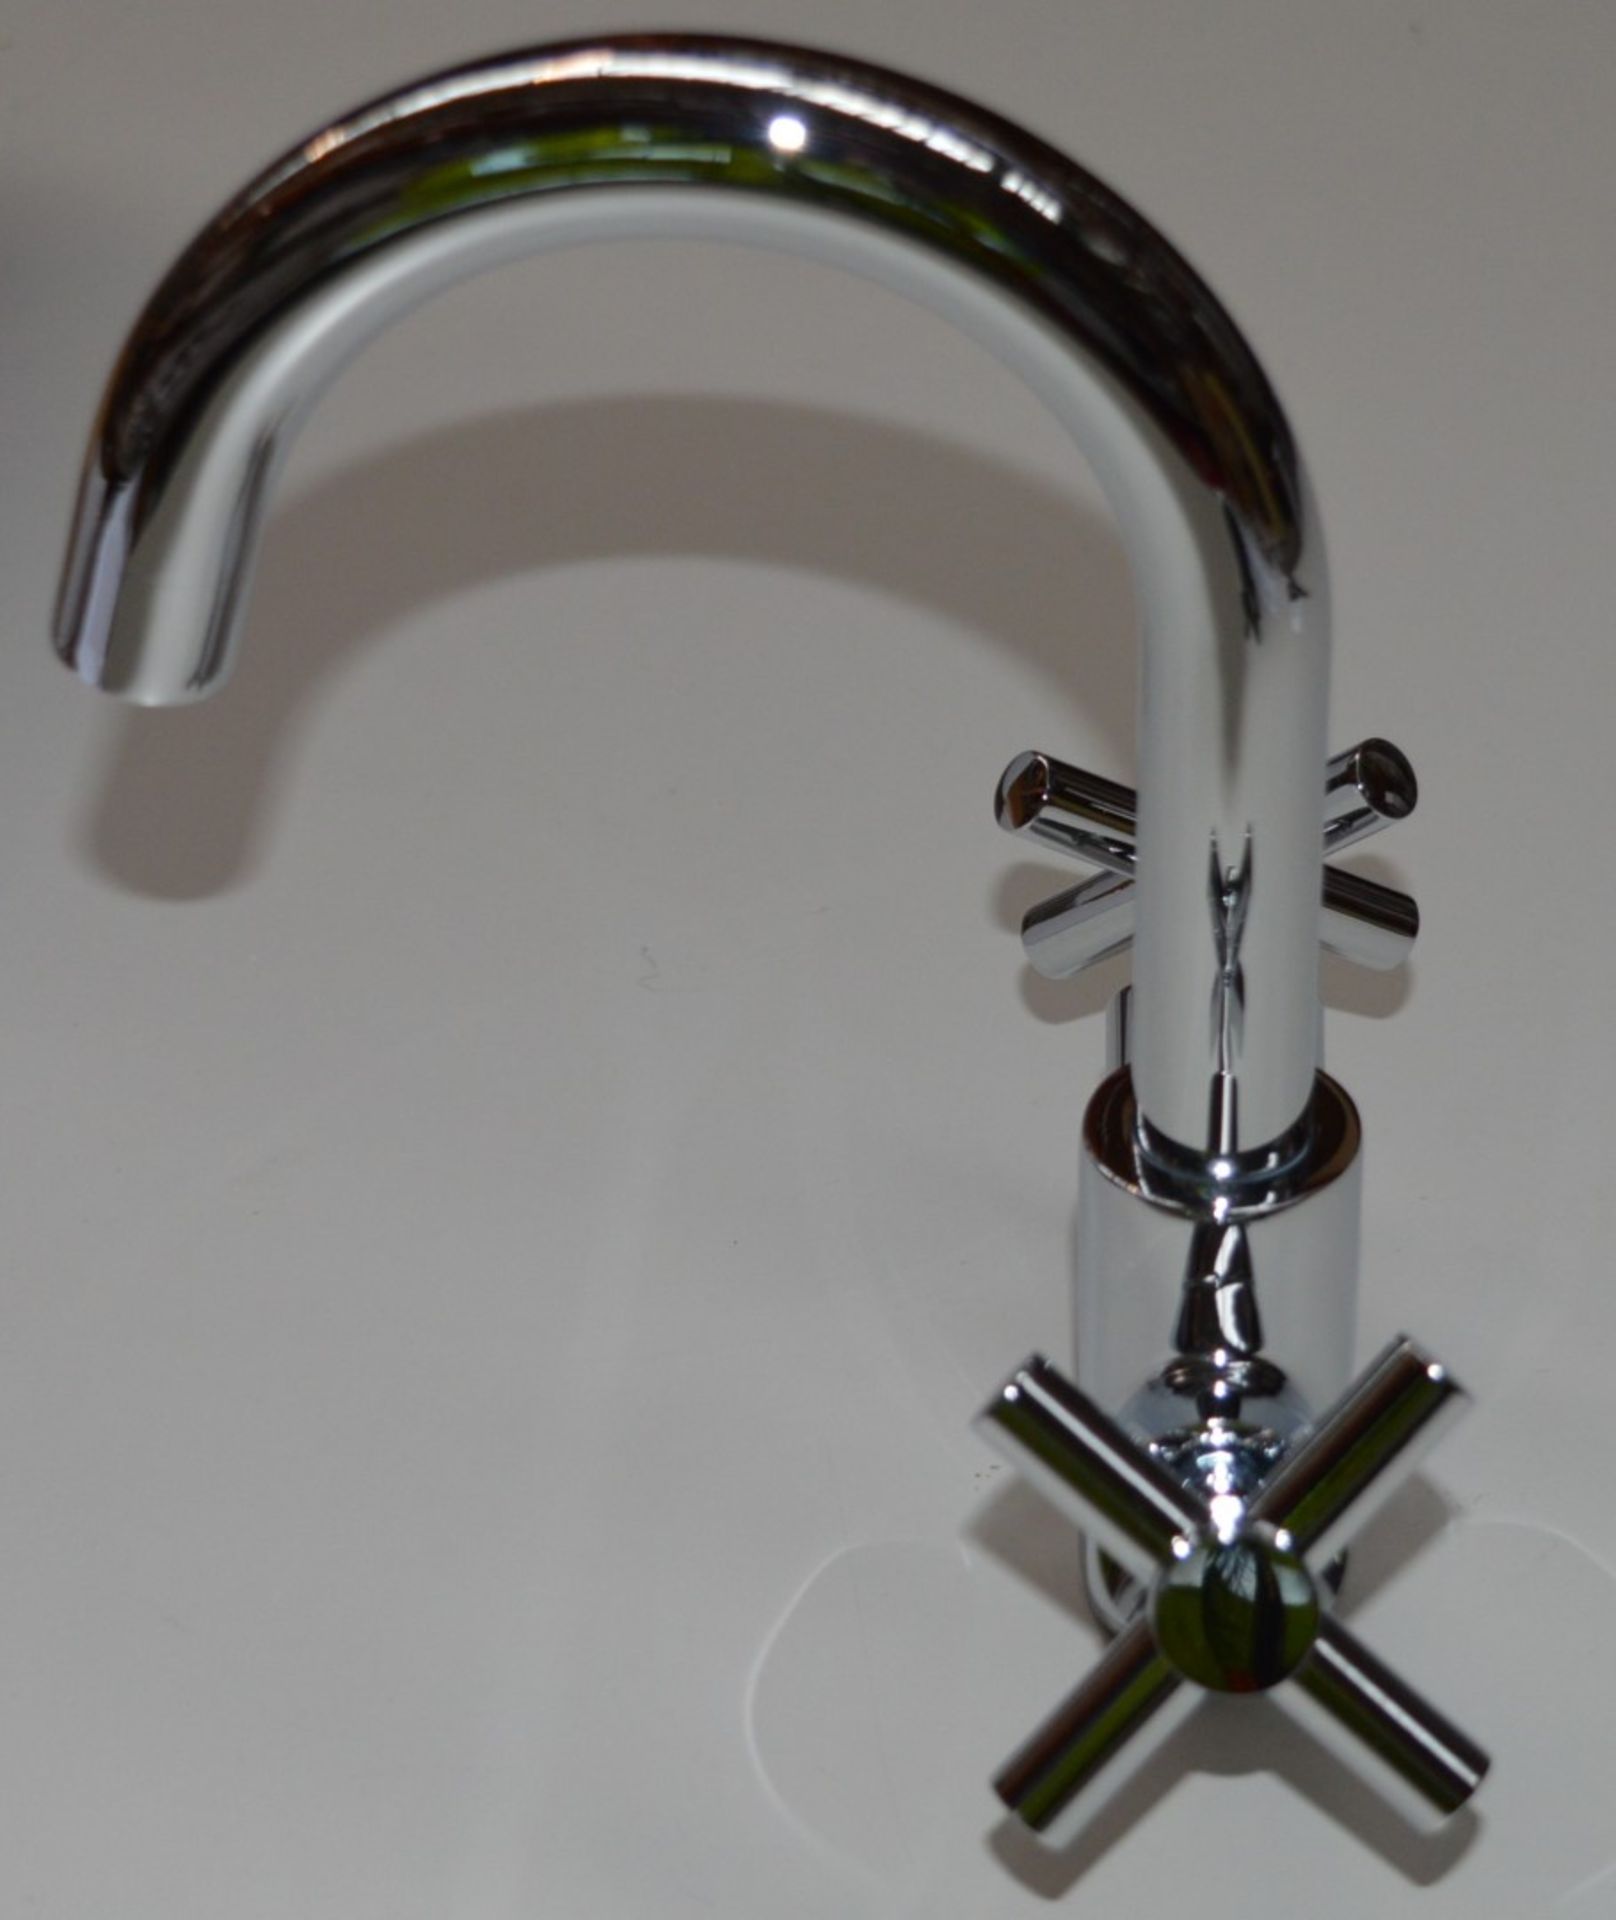 1 x Alexa Swan Neck Basin Mixer Tap - Brass Construction With Contemporary Chrome Finish - Unused - Image 6 of 8